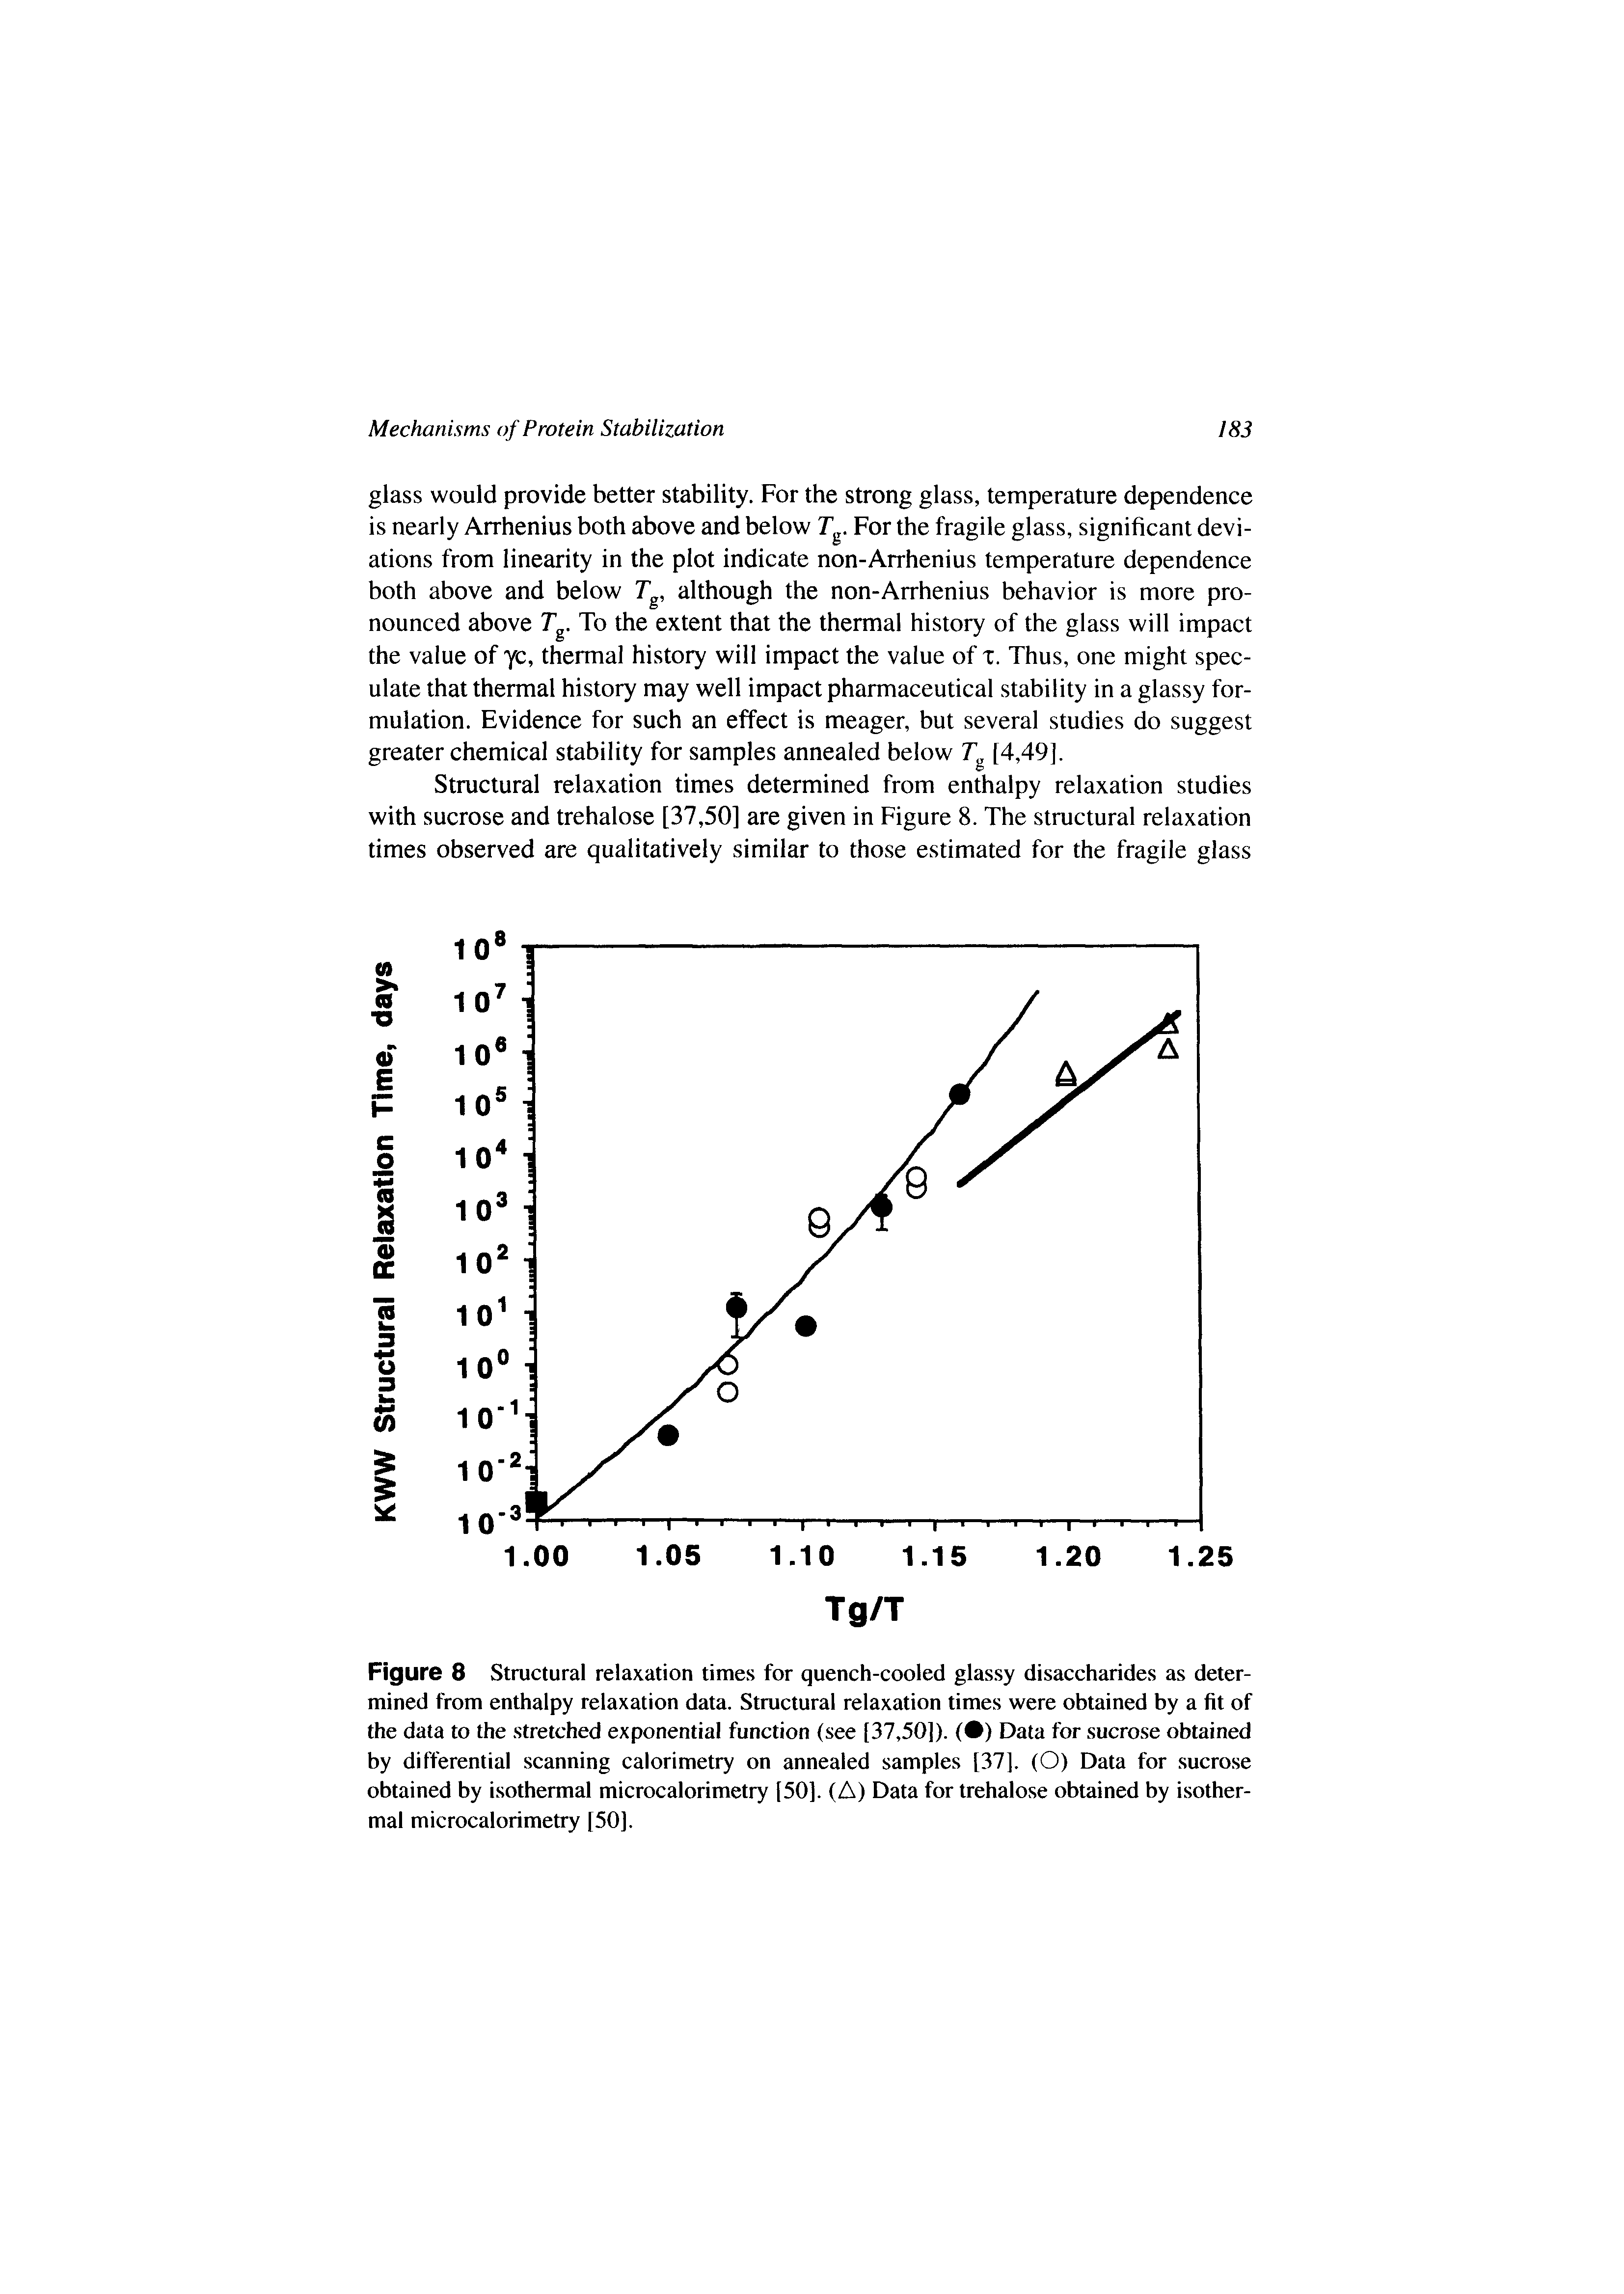 Figure 8 Structural relaxation times for quench-cooled glassy disaccharides as determined from enthalpy relaxation data. Structural relaxation times were obtained by a fit of the data to the stretched exponential function (see [37,50]). ( ) Data for sucrose obtained by differential scanning calorimetry on annealed samples [37], (O) Data for sucrose obtained by isothermal microcalorimetry [50]. (A) Data for trehalose obtained by isothermal microcalorimetry [50].